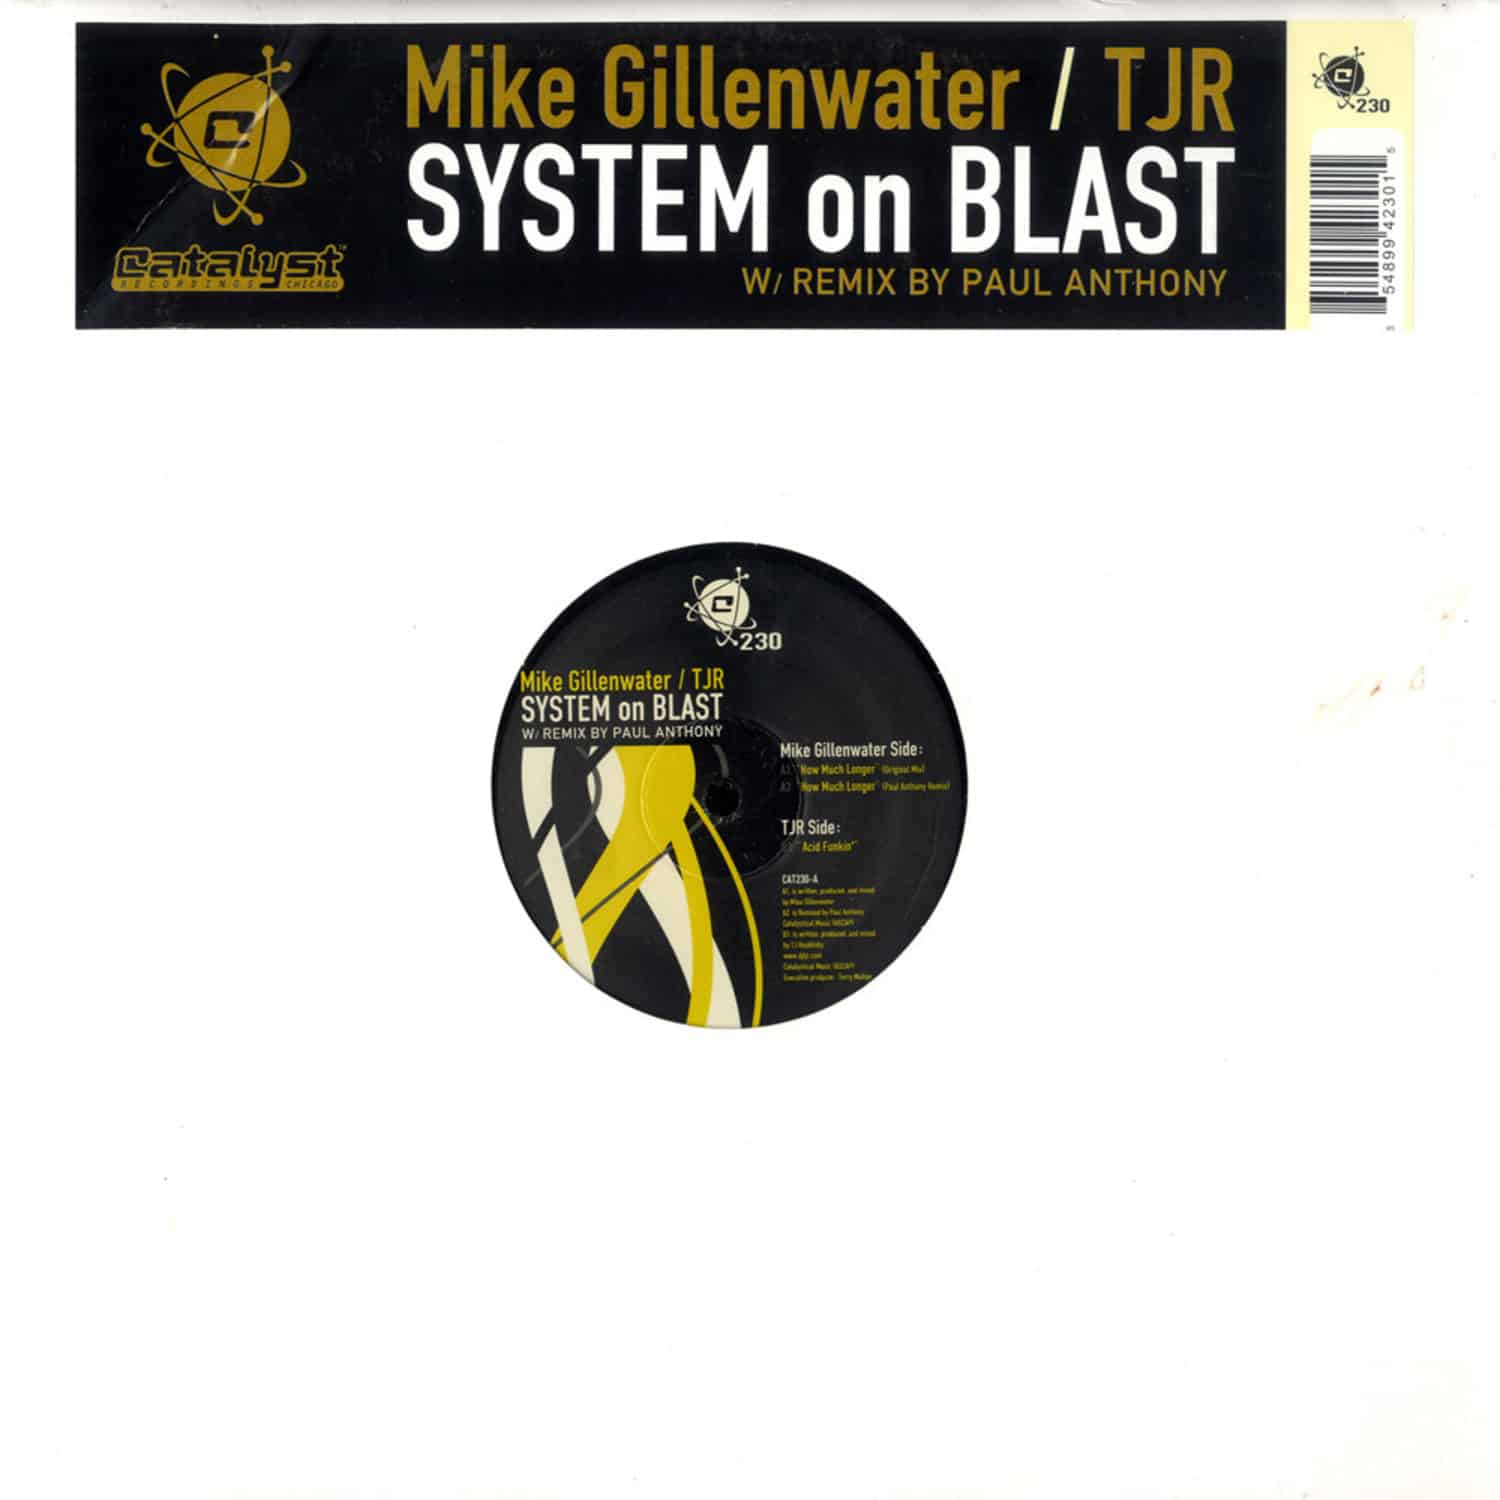 Mike Gillenwater / TJR - SYSTEM on BLAST